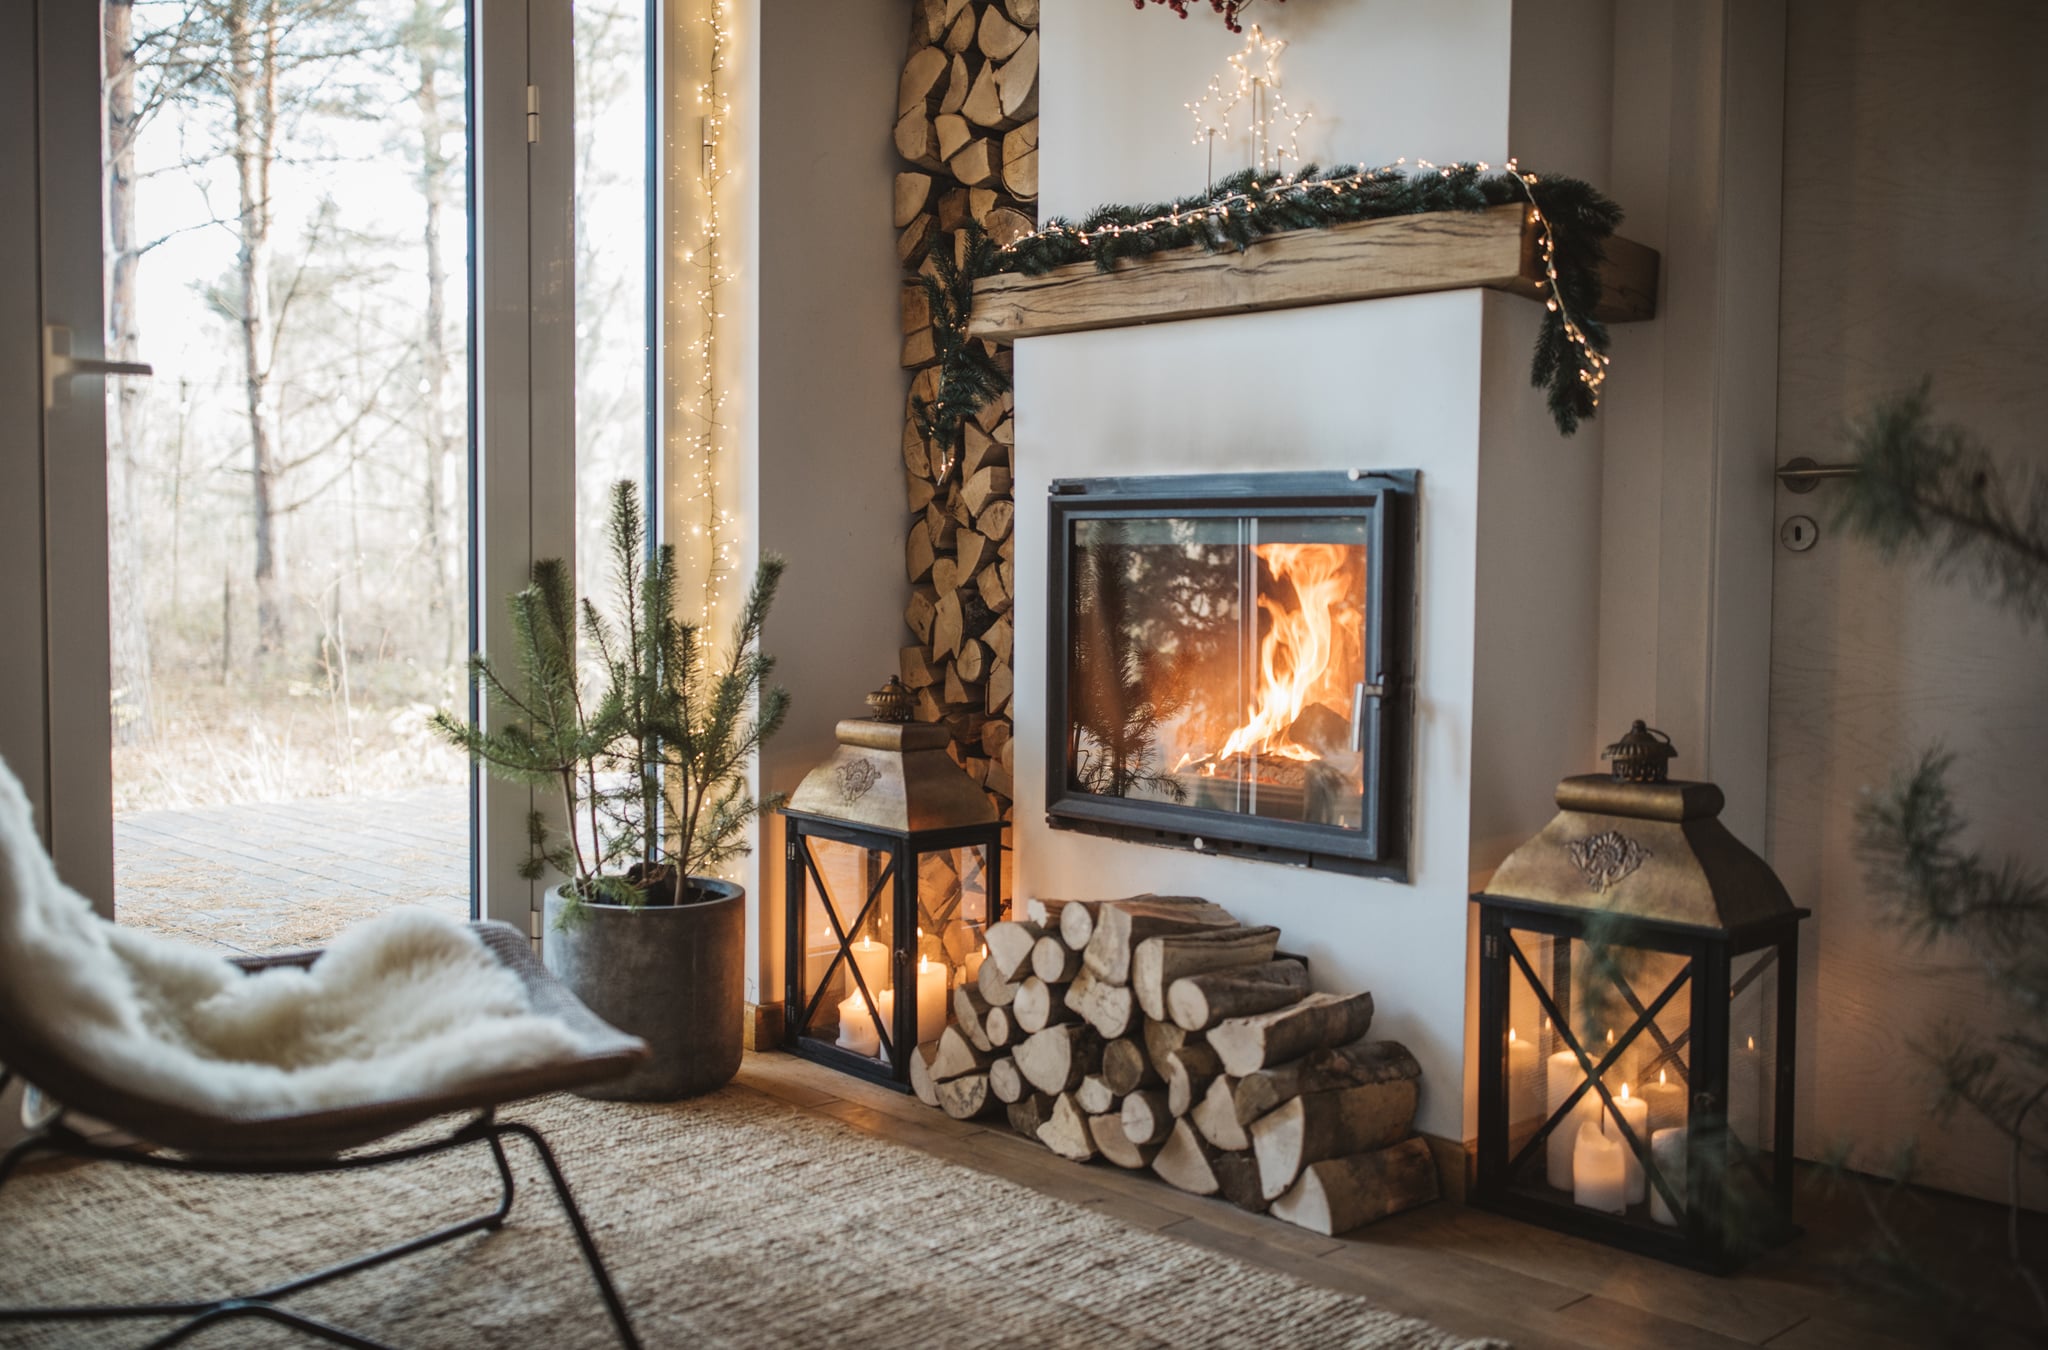 Cosy living room winter interior with fireplace.